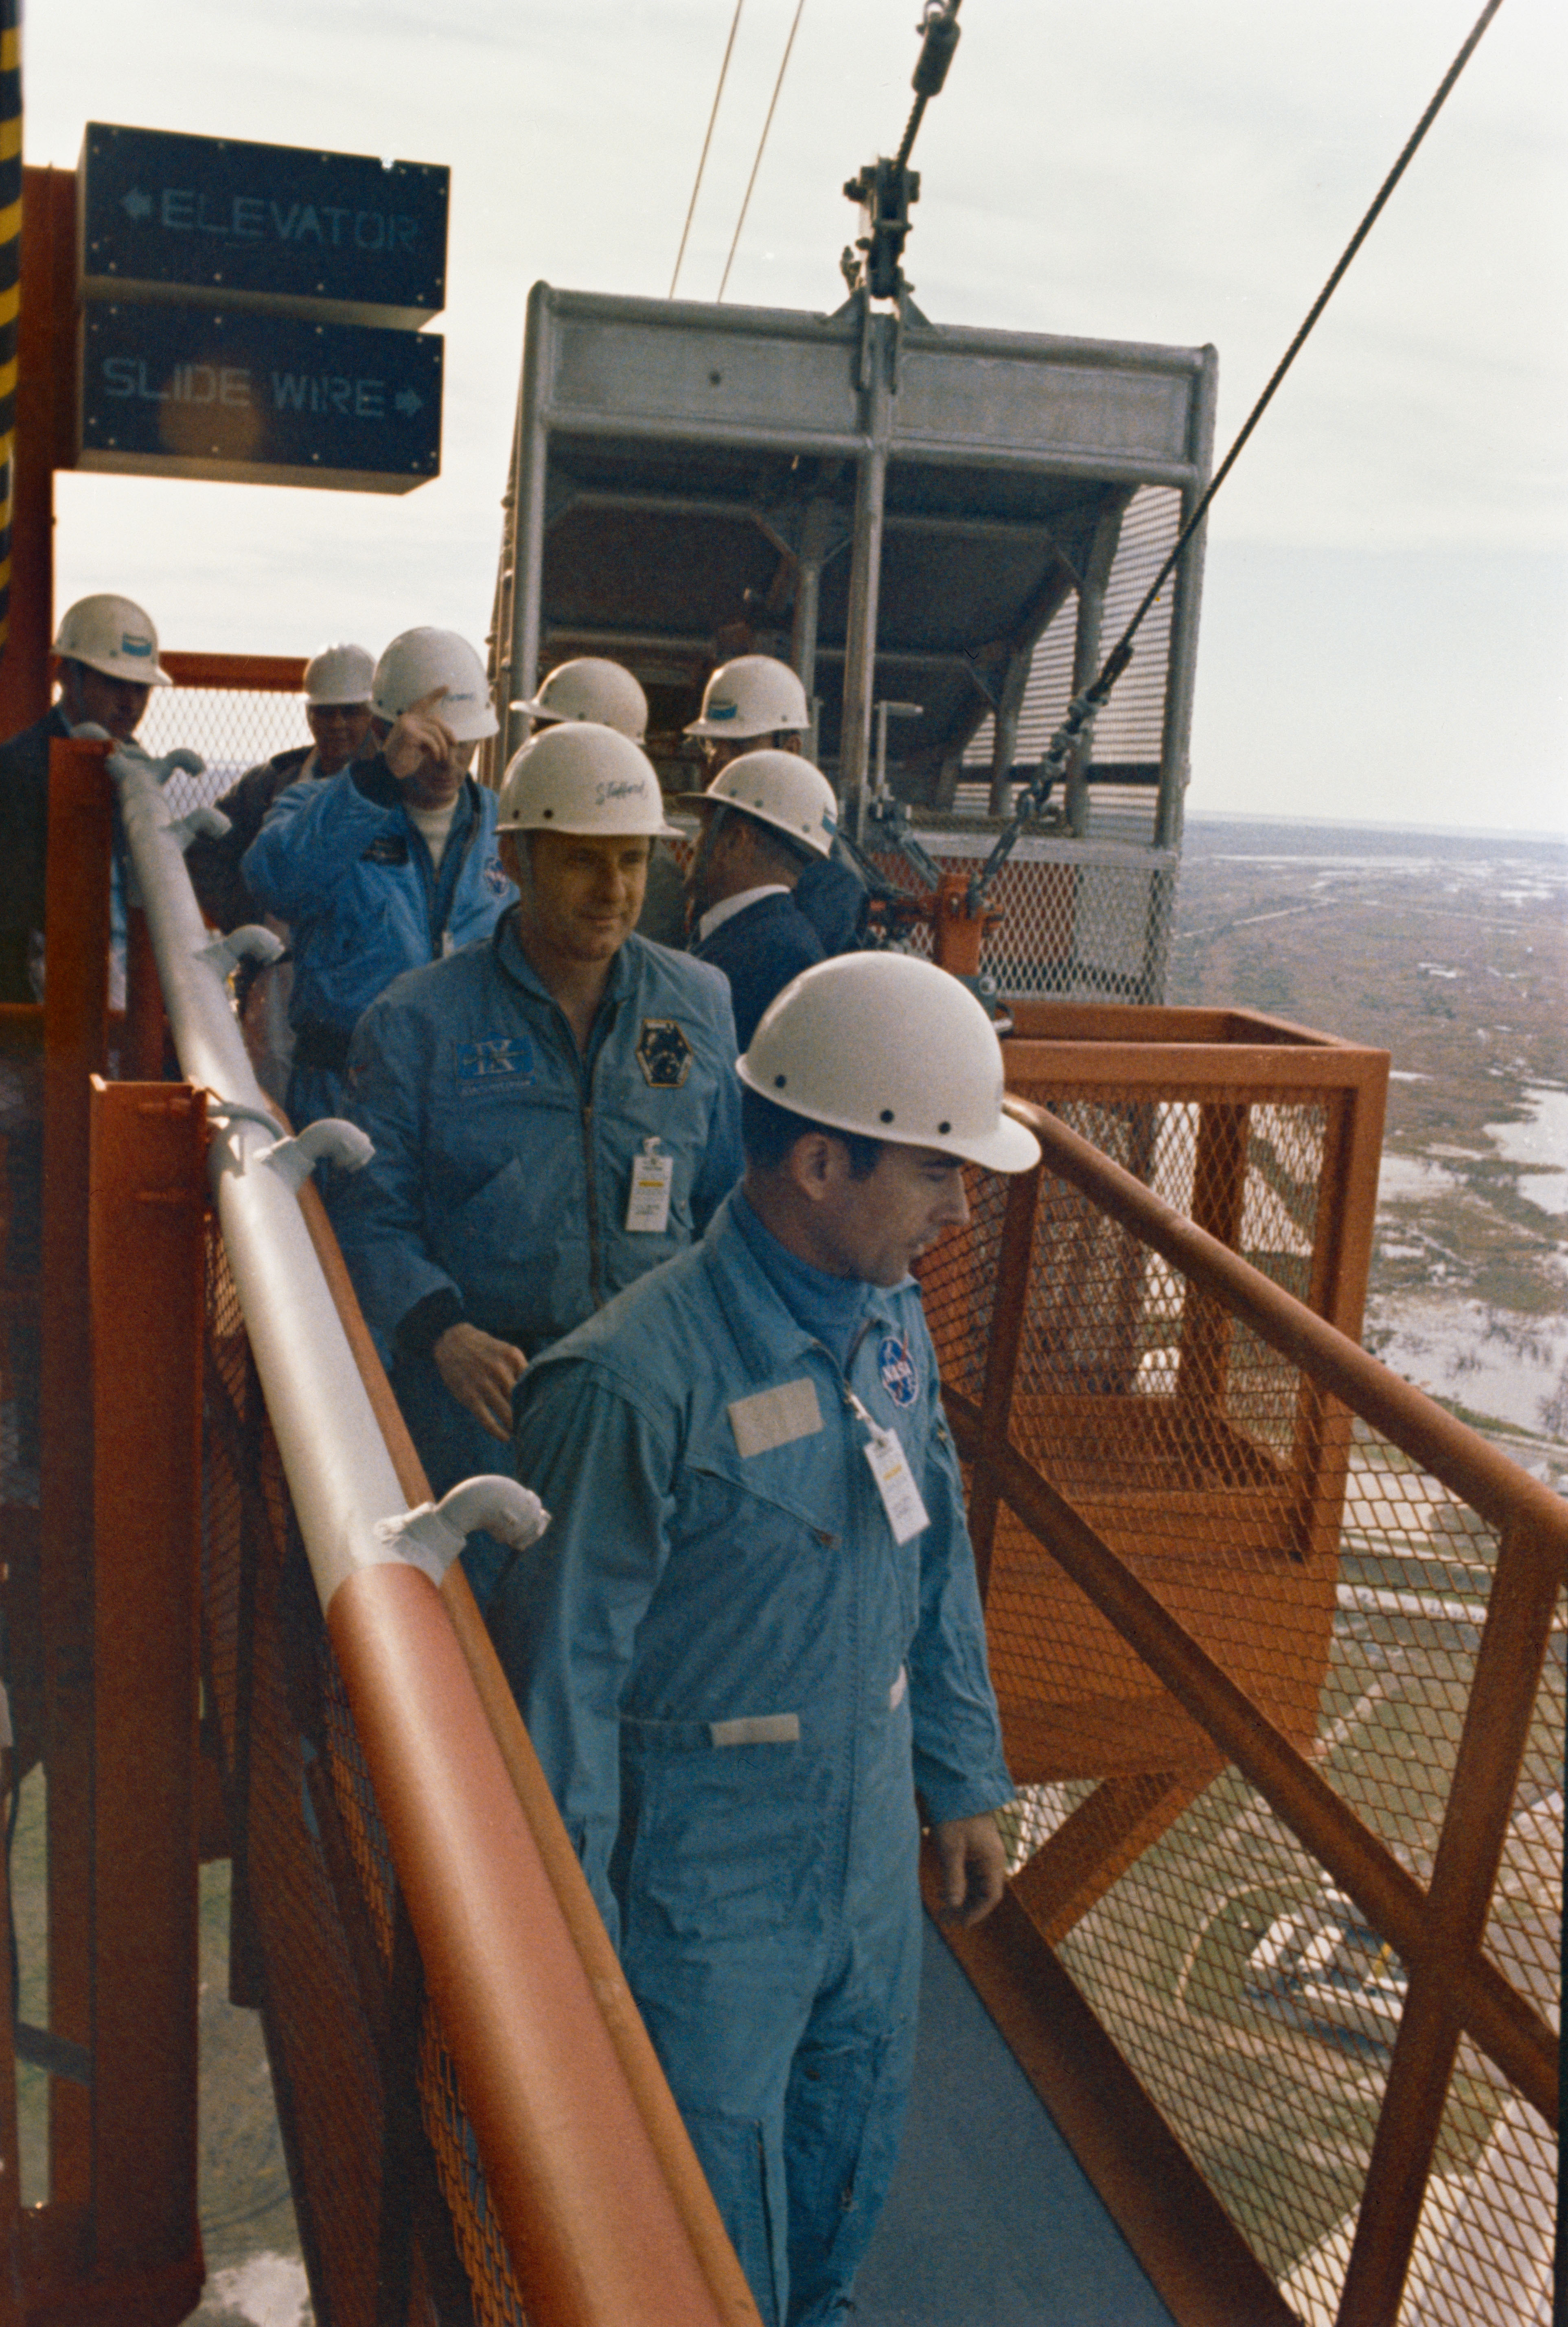 Young, front, Stafford, and Cernan inspect the slide wire escape mechanism at the top of Launch Pad 39B